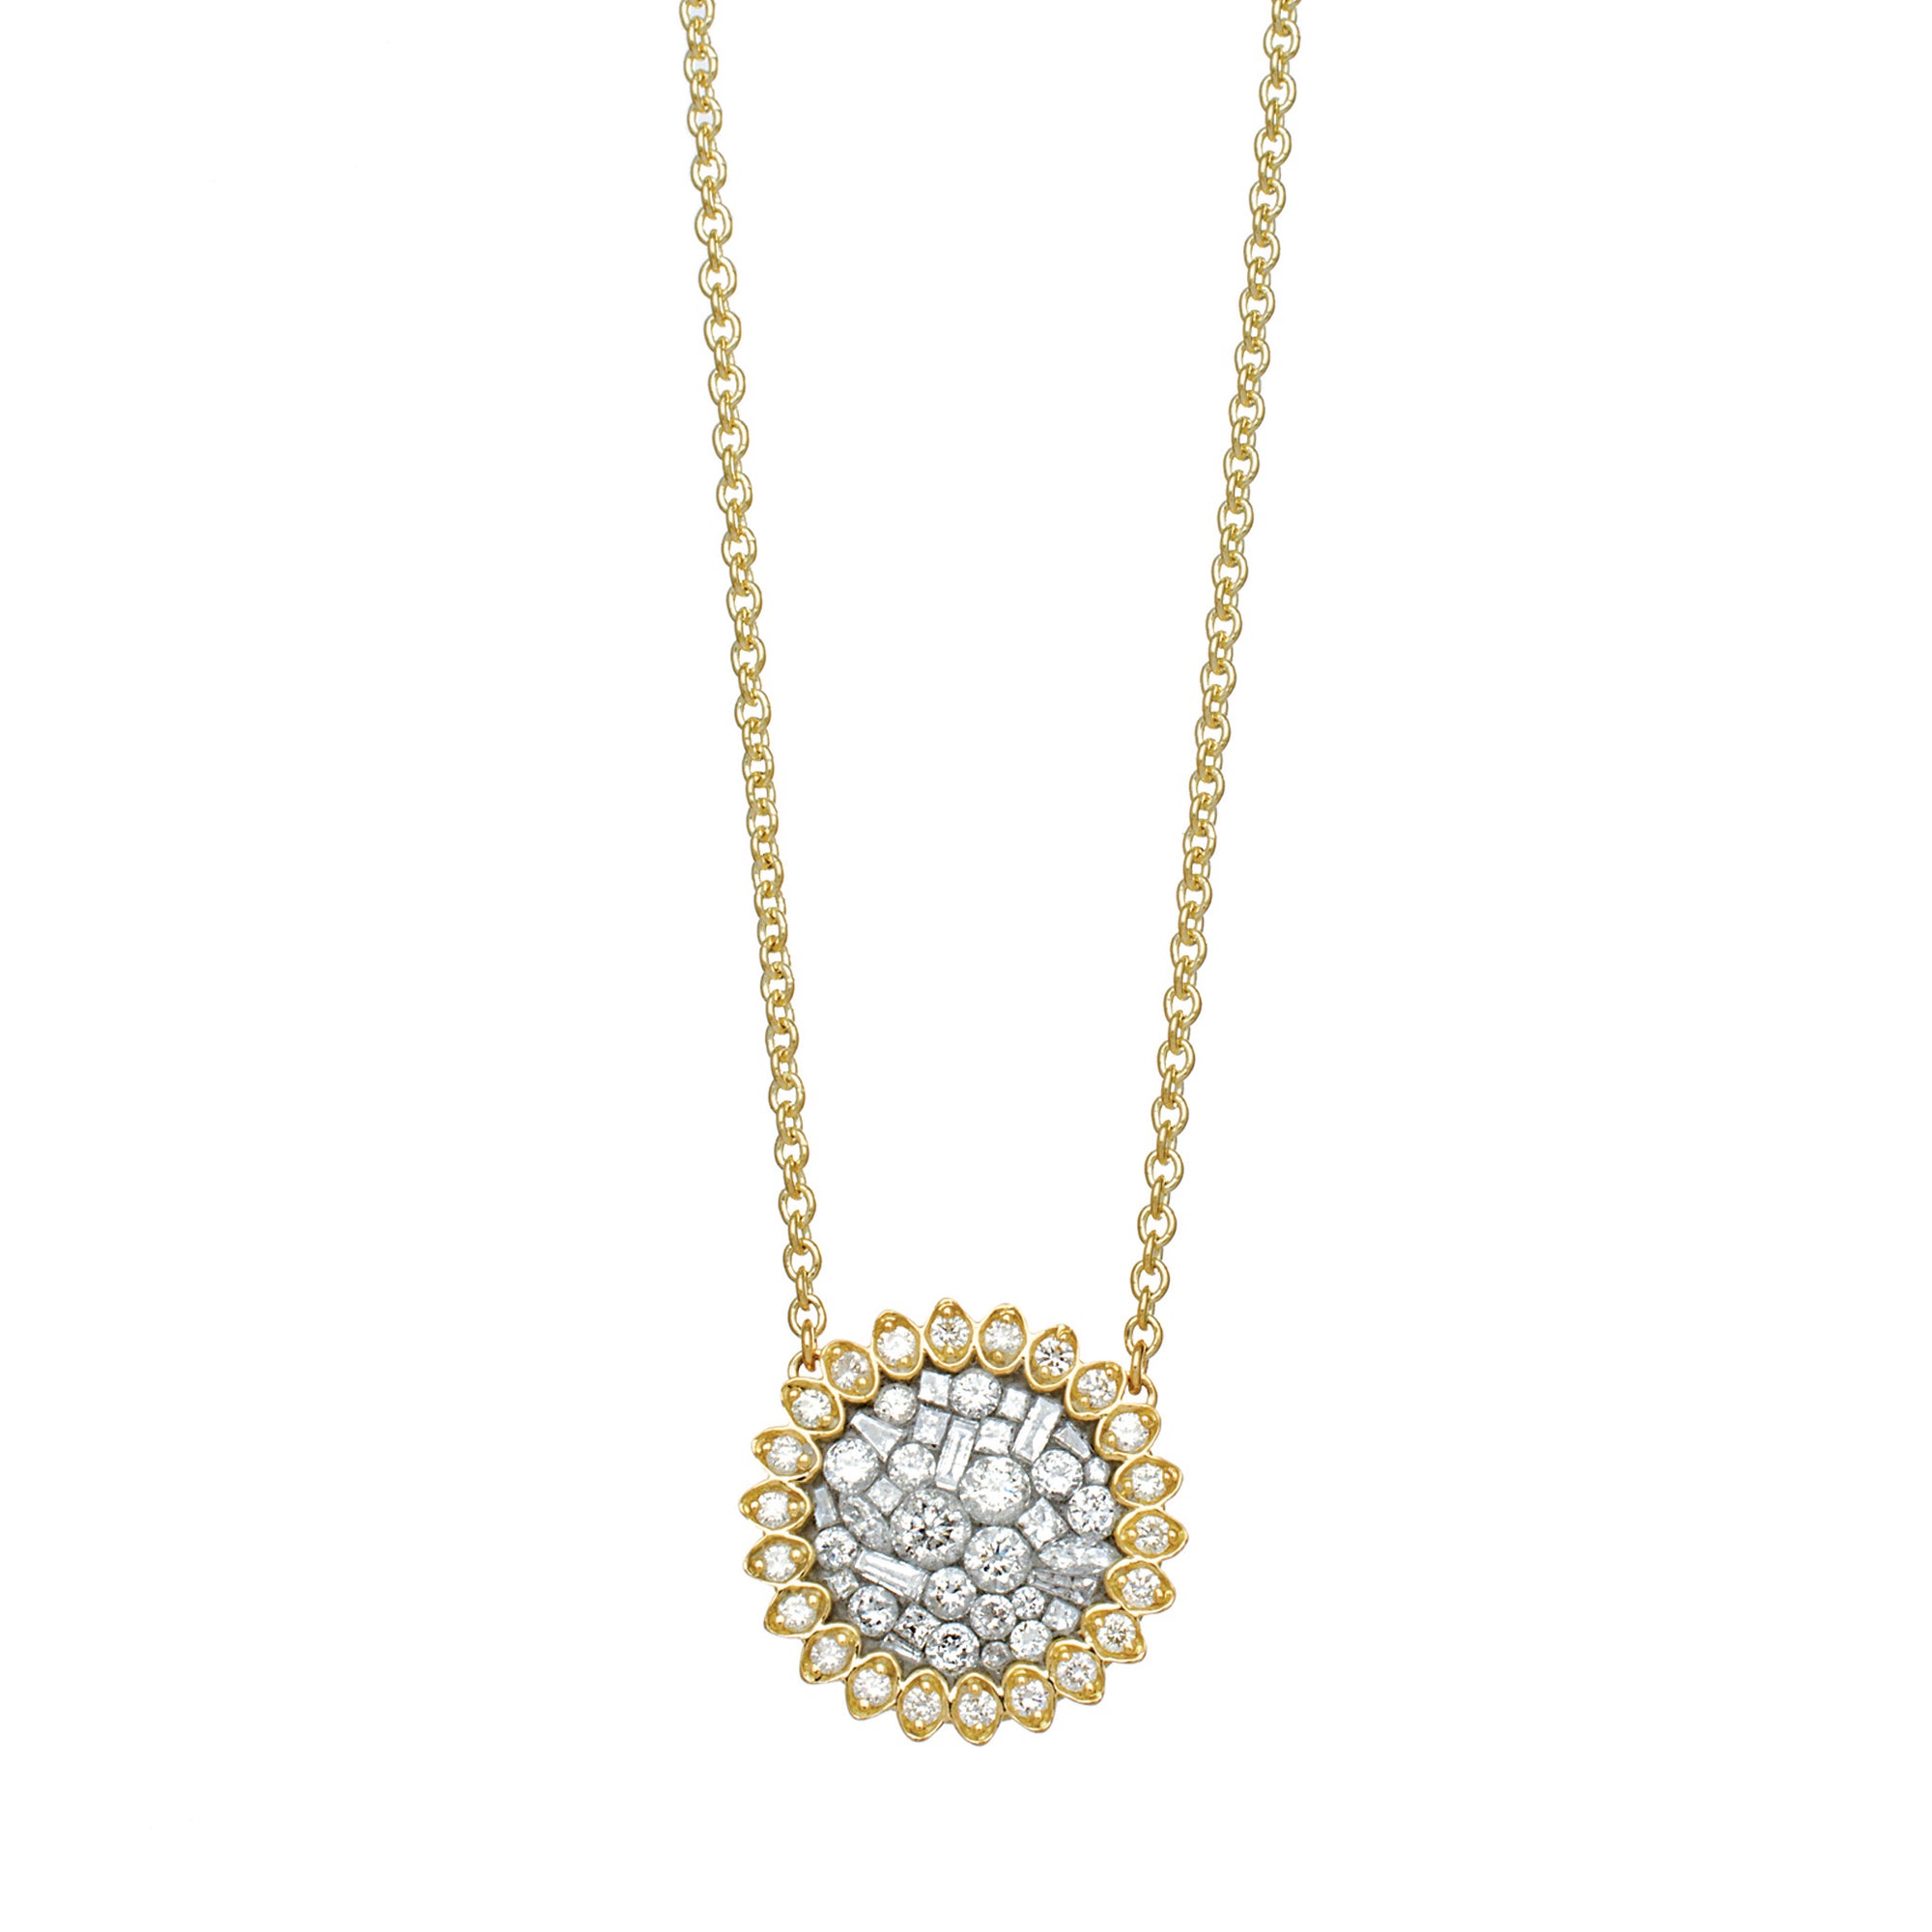 Ice Sunflower Diamond Necklace by Pleve available at Talisman Collection Fine Jewelers in El Dorado Hills, CA and online. Specs: 1.10 cttw diamonds, 18k yellow gold.